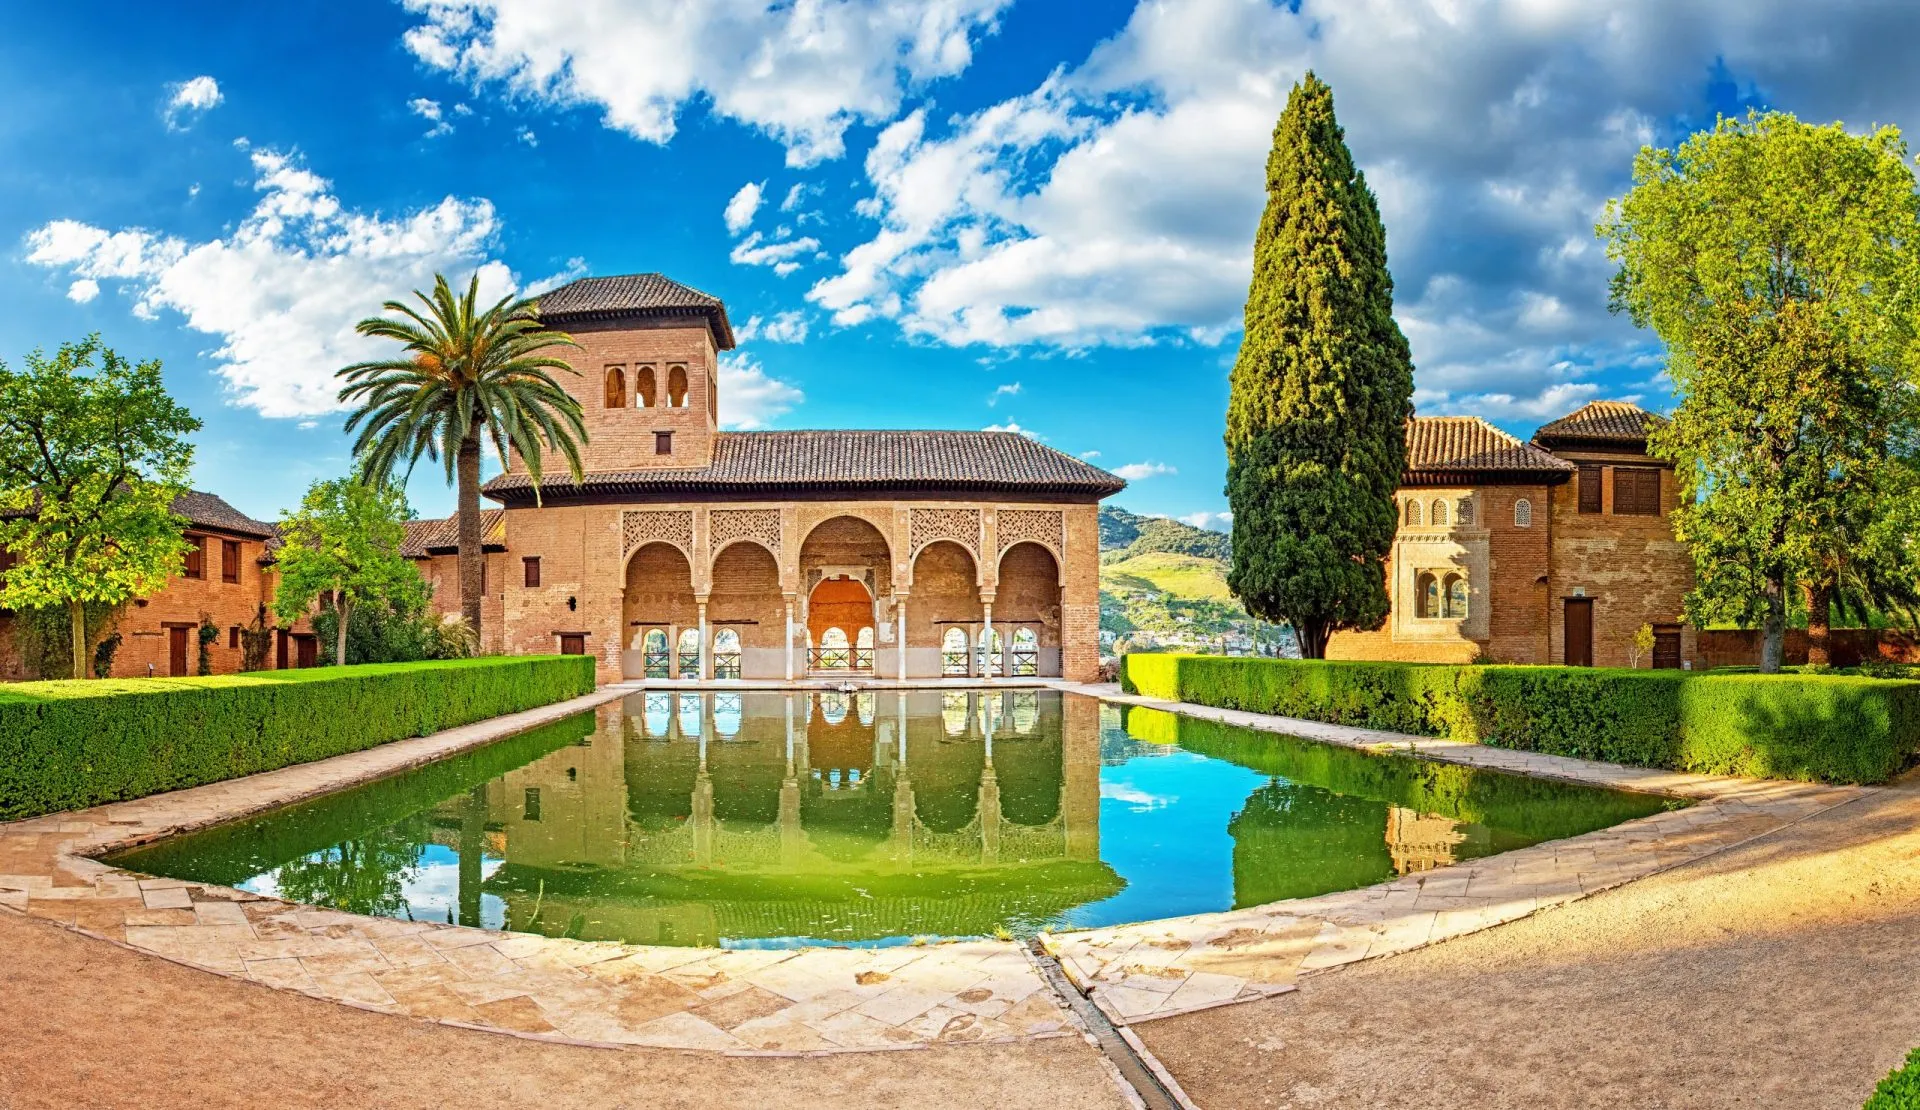 Palace in the famous Alhambra in Granada, Spain